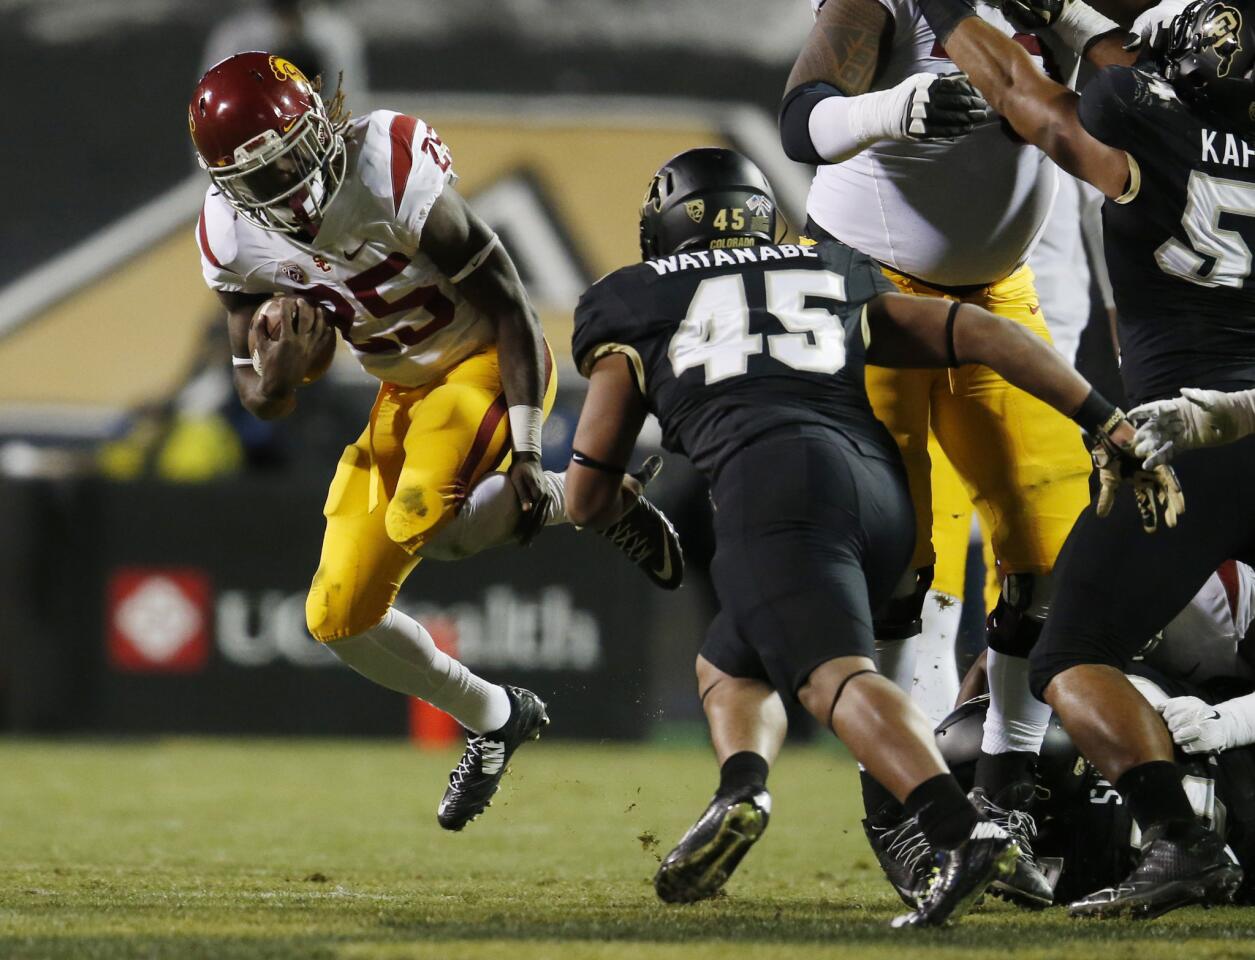 USC running back Ronald Jones II tries to evade Colorado linebacker Grant Watanabe in the first half of their game Friday night in Boulder.